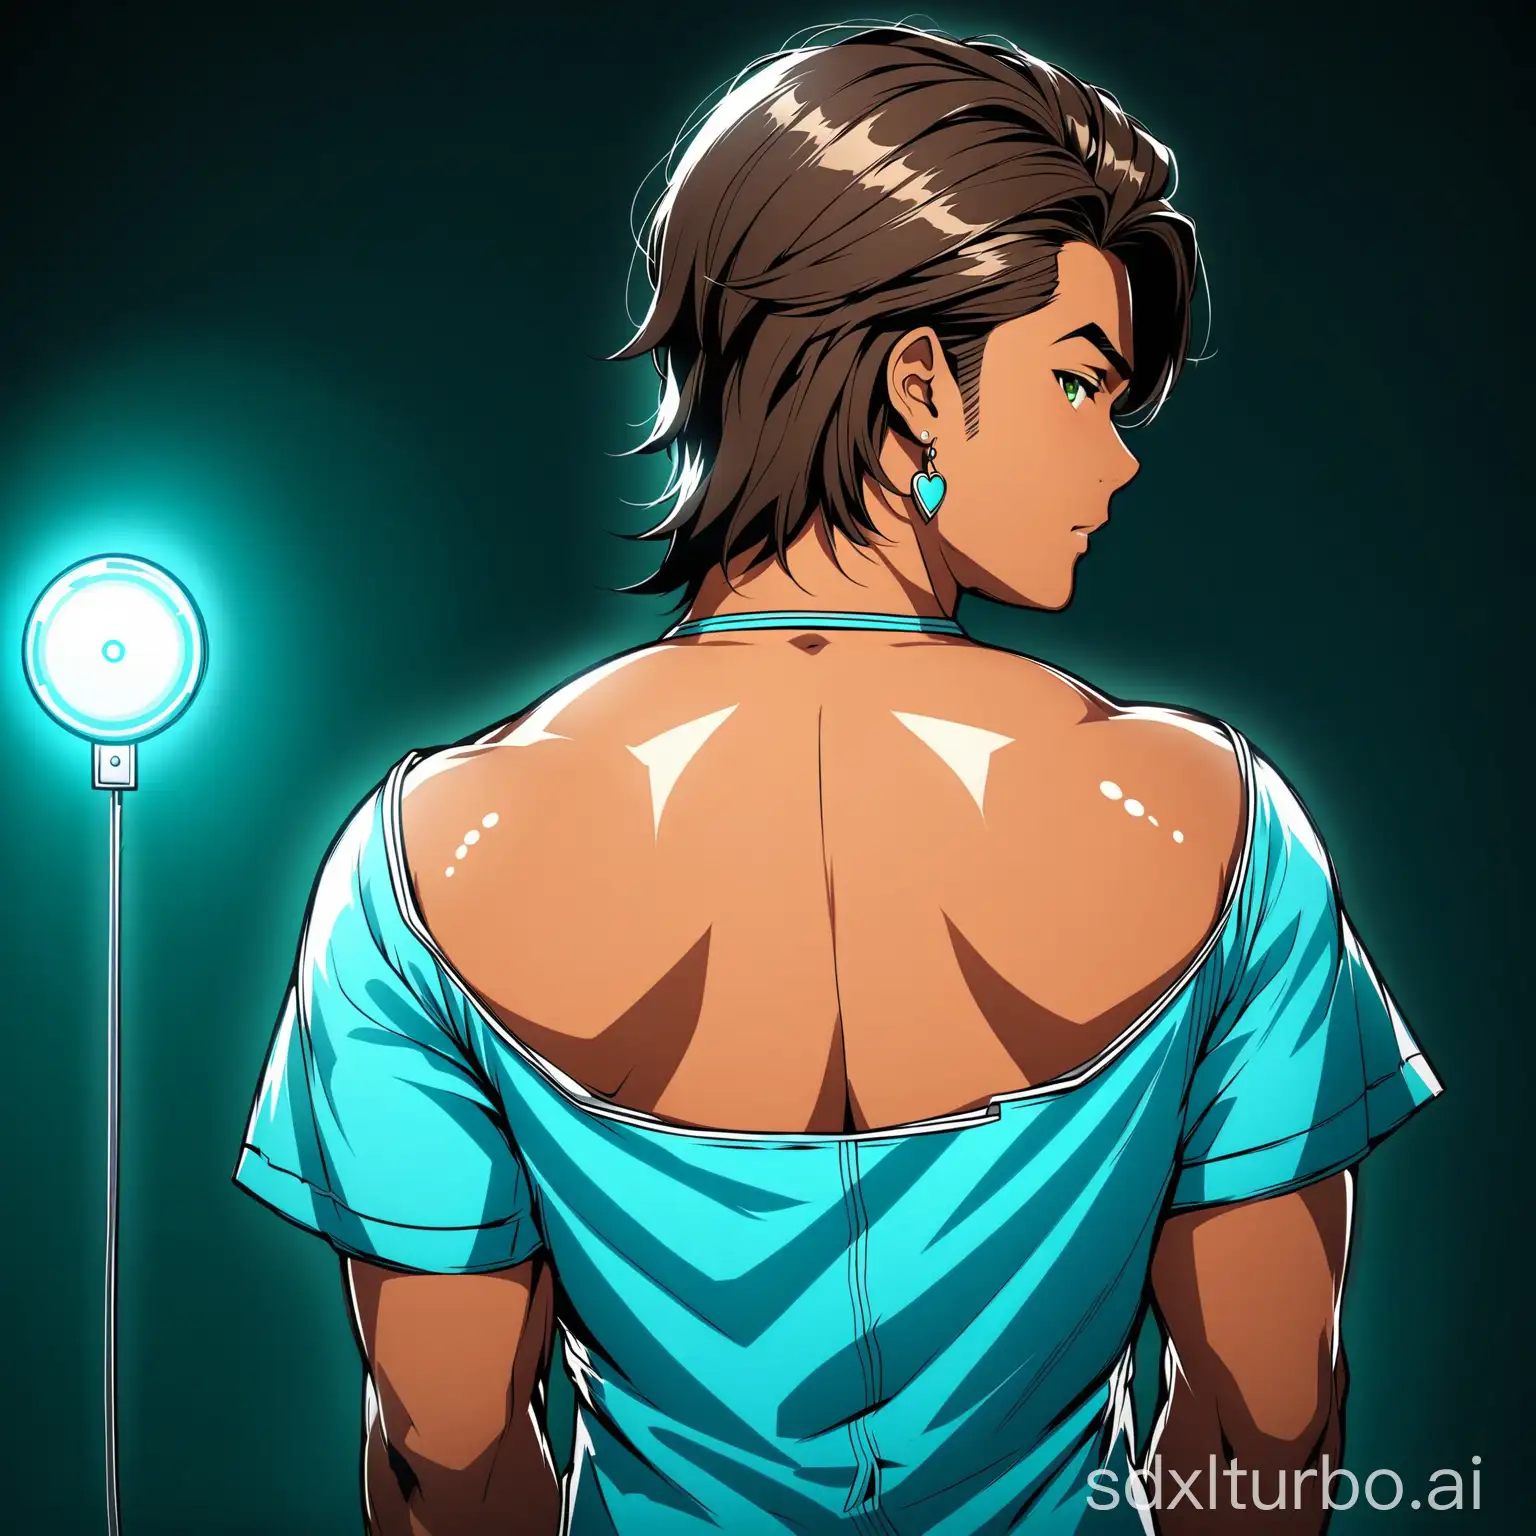 A tanned handsome chubby young man, mullet brown hair, green eyes, earrings, with blue nurse uniform, sensual posing, from behind, in a dark room